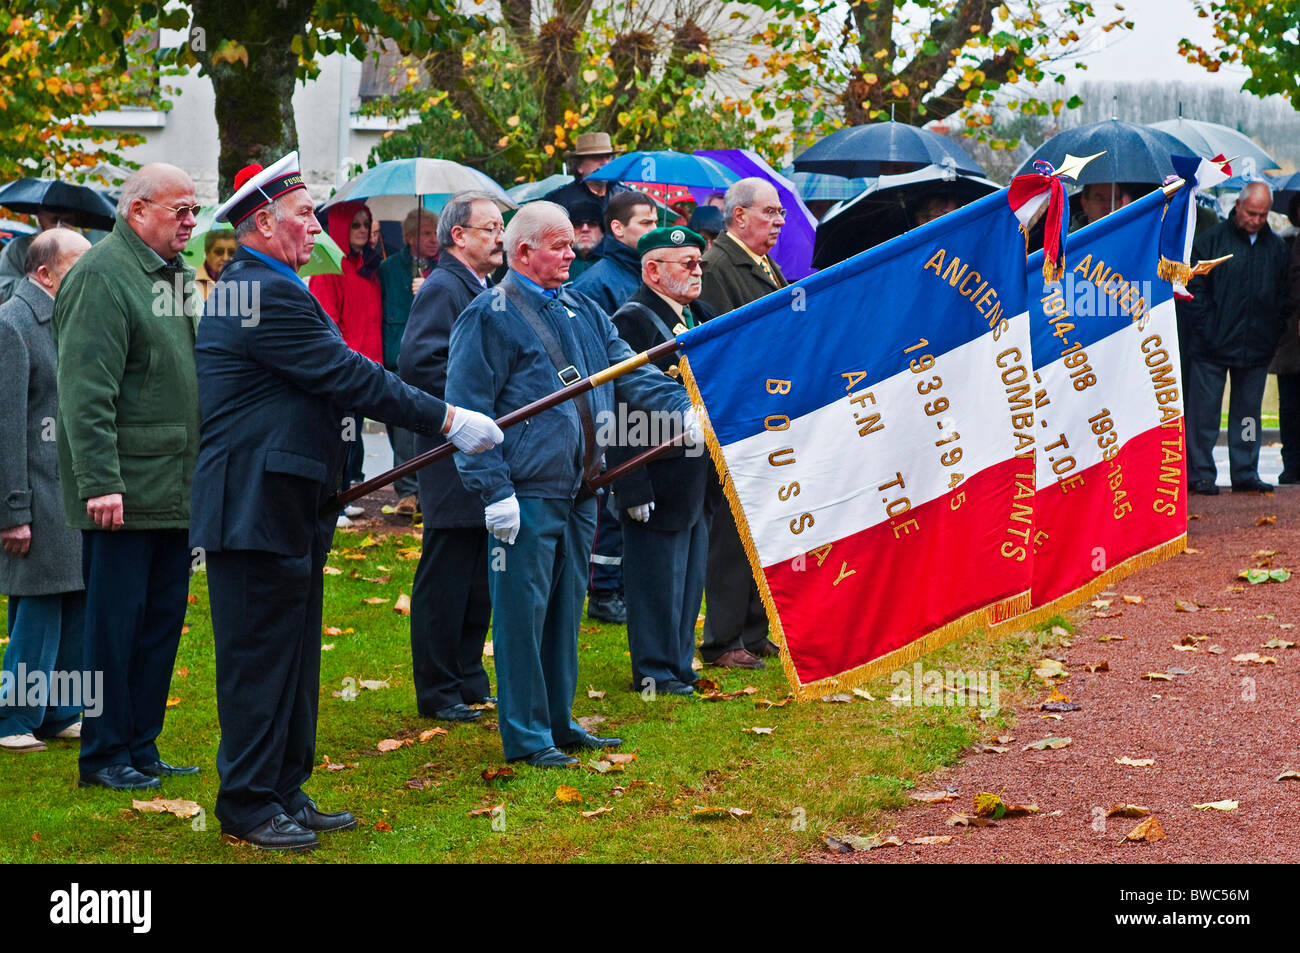 Old soldiers carrying Tricolor flags at Remembrance Day parade - France. Stock Photo